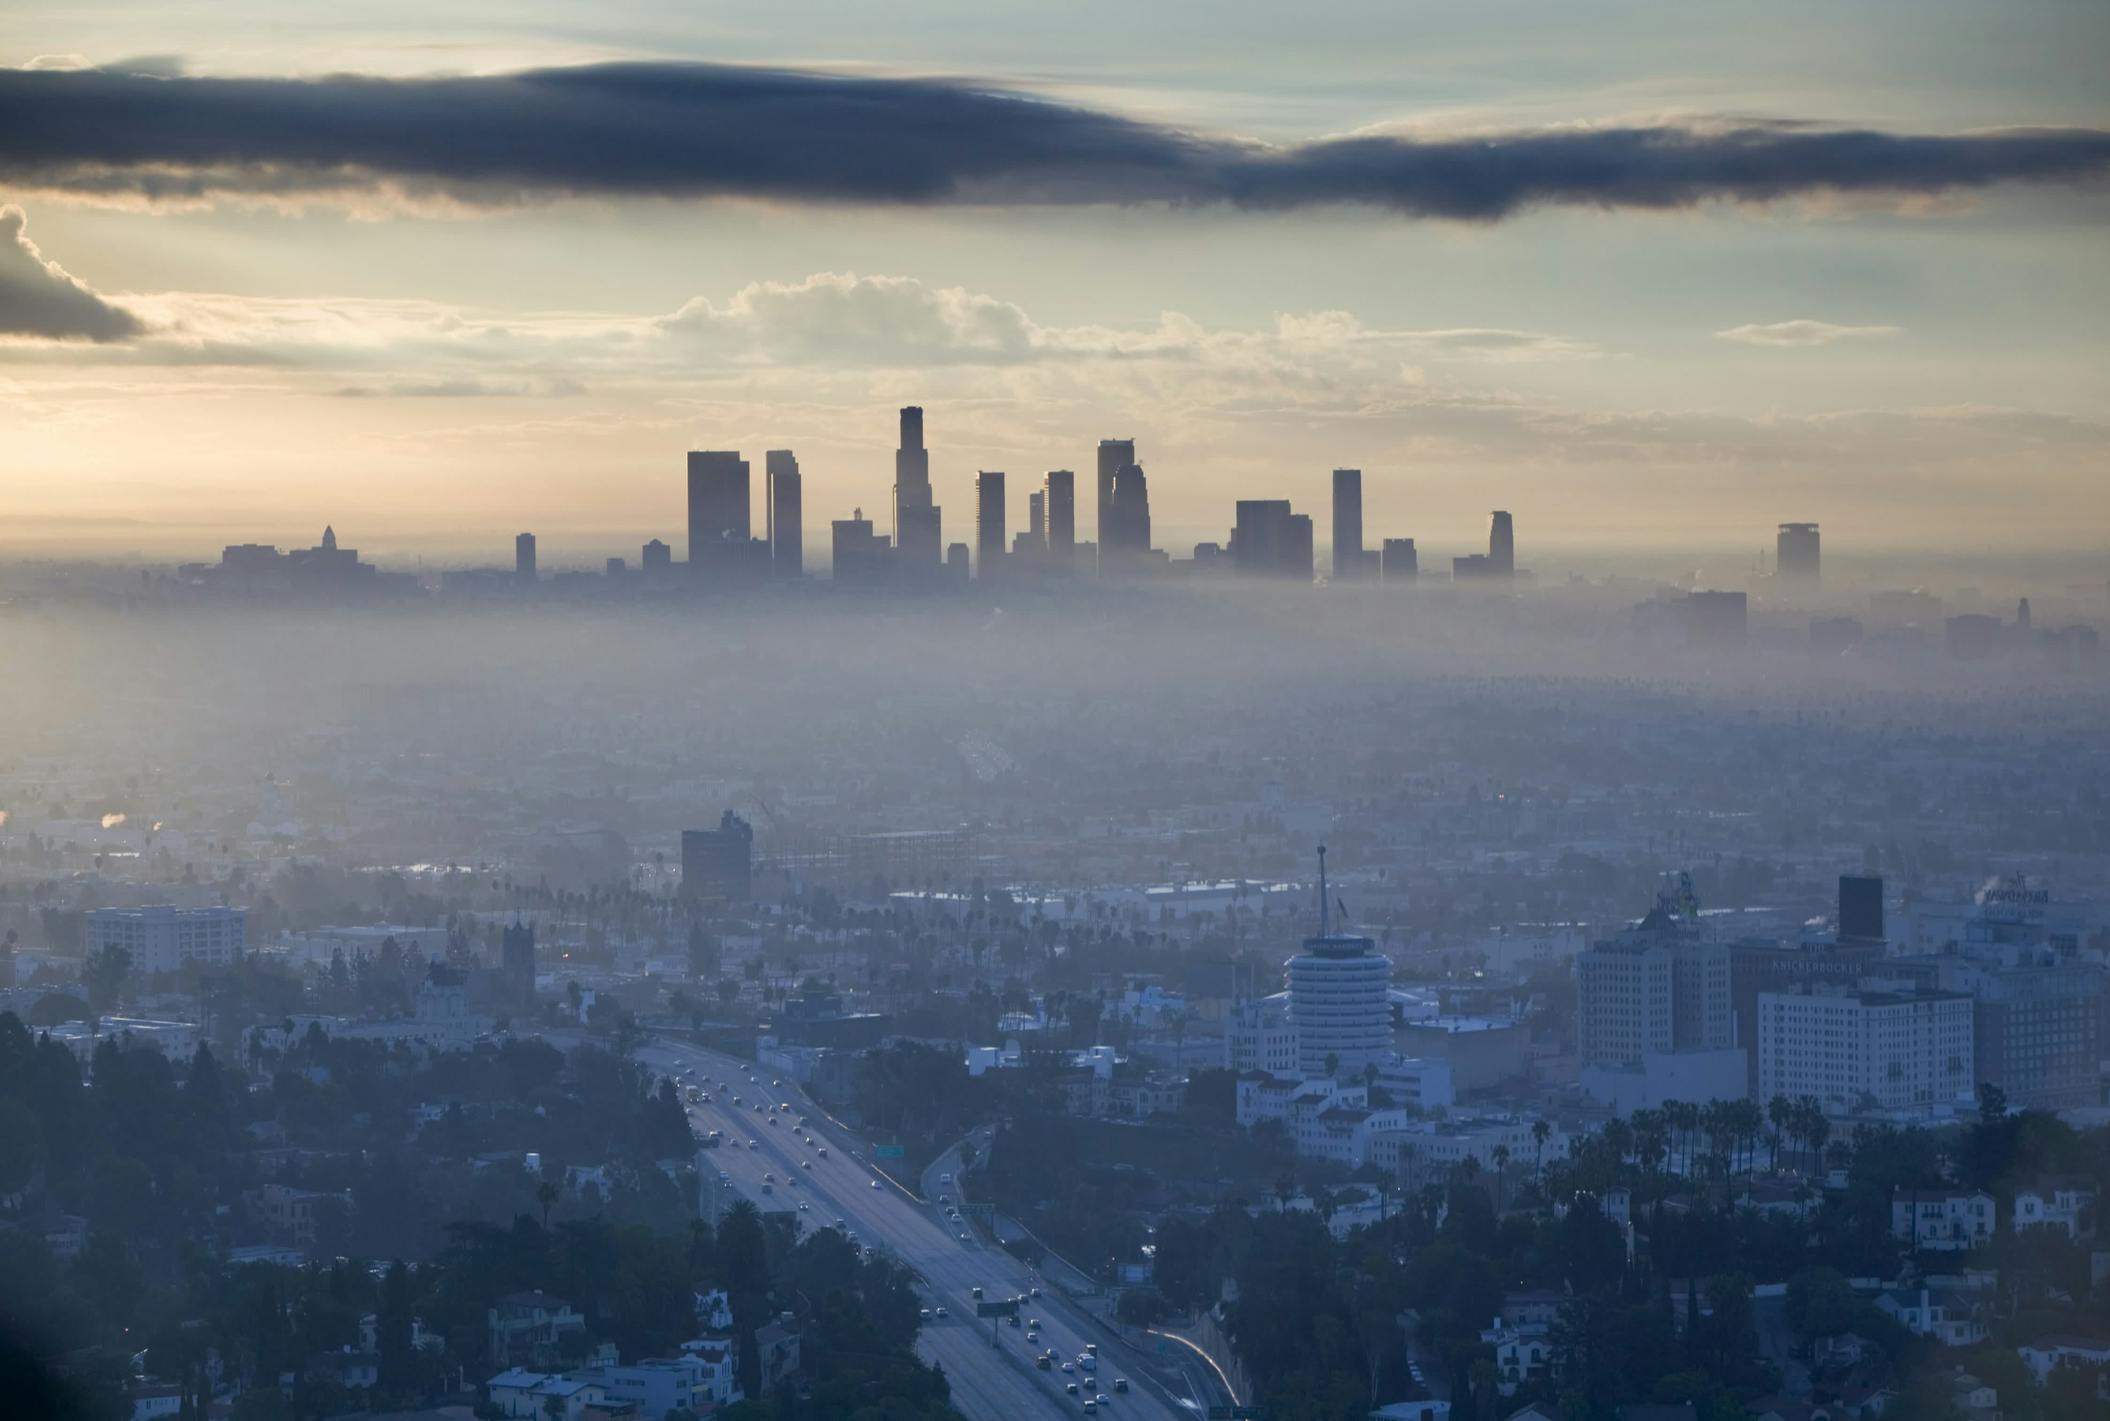 for-the-19th-time-los-angeles-takes-the-crown-as-the-smoggiest-city-in